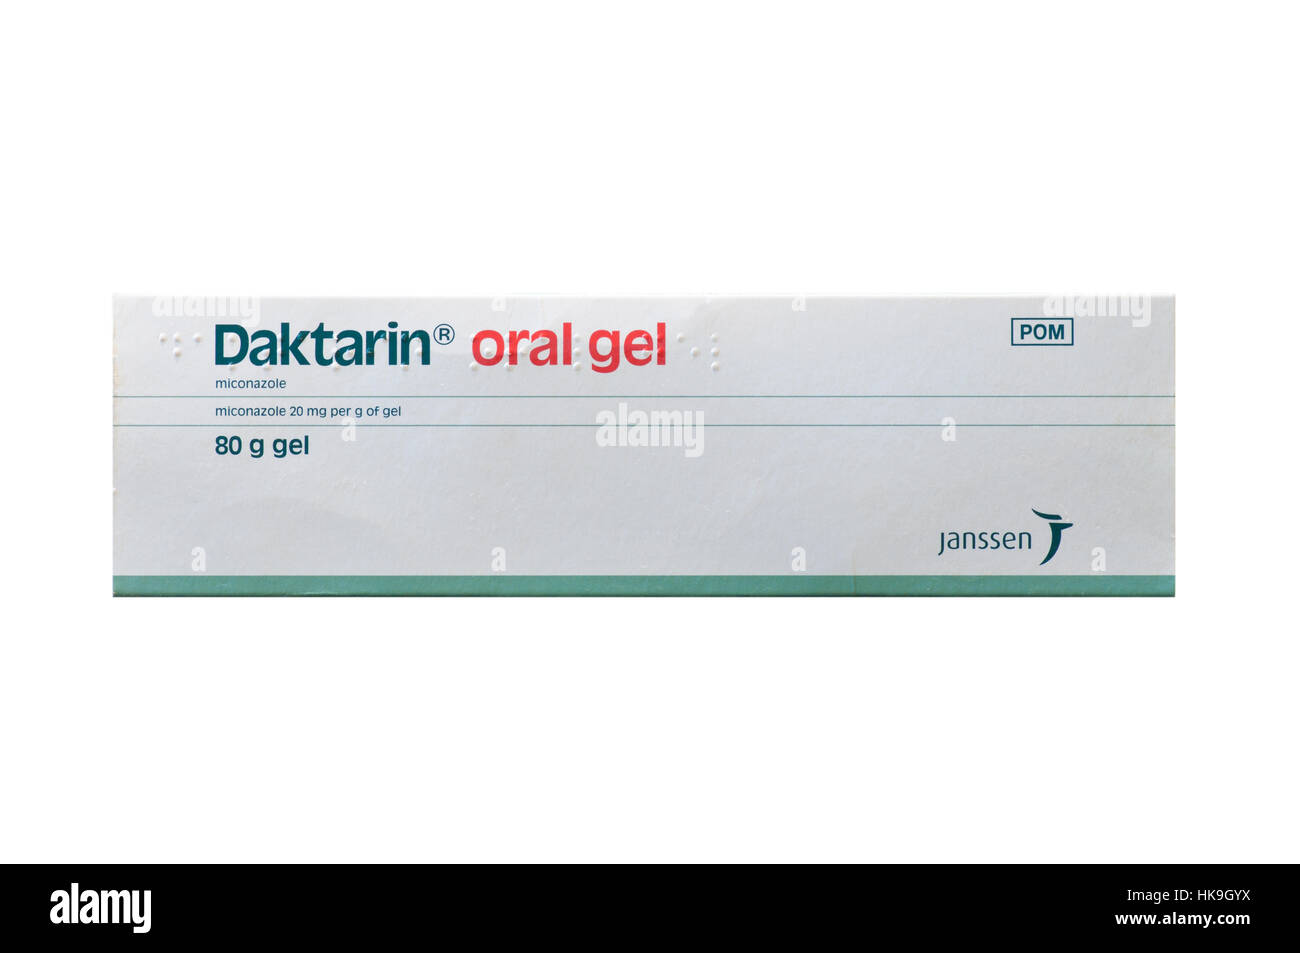 Box Daktarin Miconazole Oral Gel High Resolution Stock Photography and  Images - Alamy